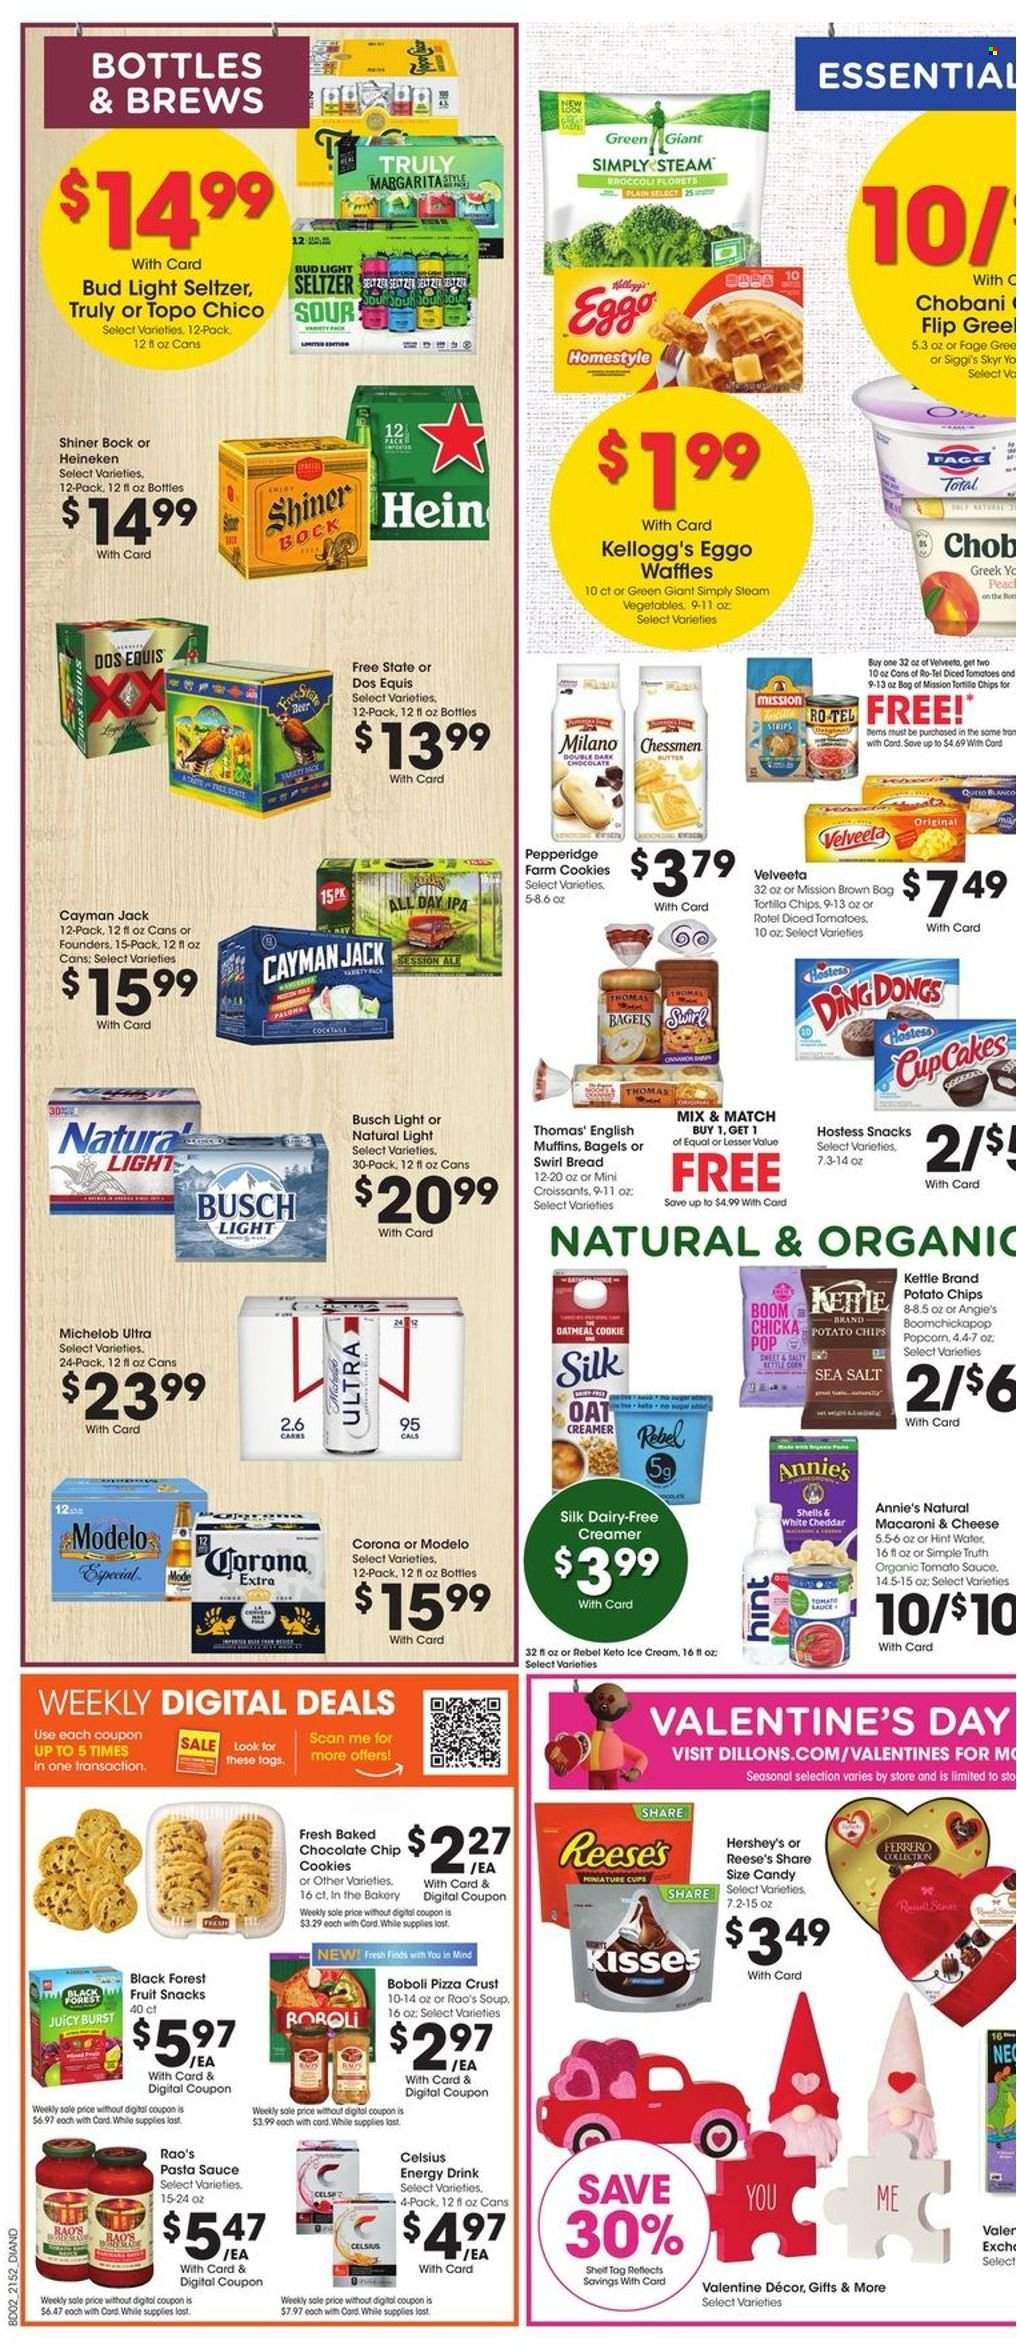 Dillons ad  - 01.26.2022 - 02.01.2022.